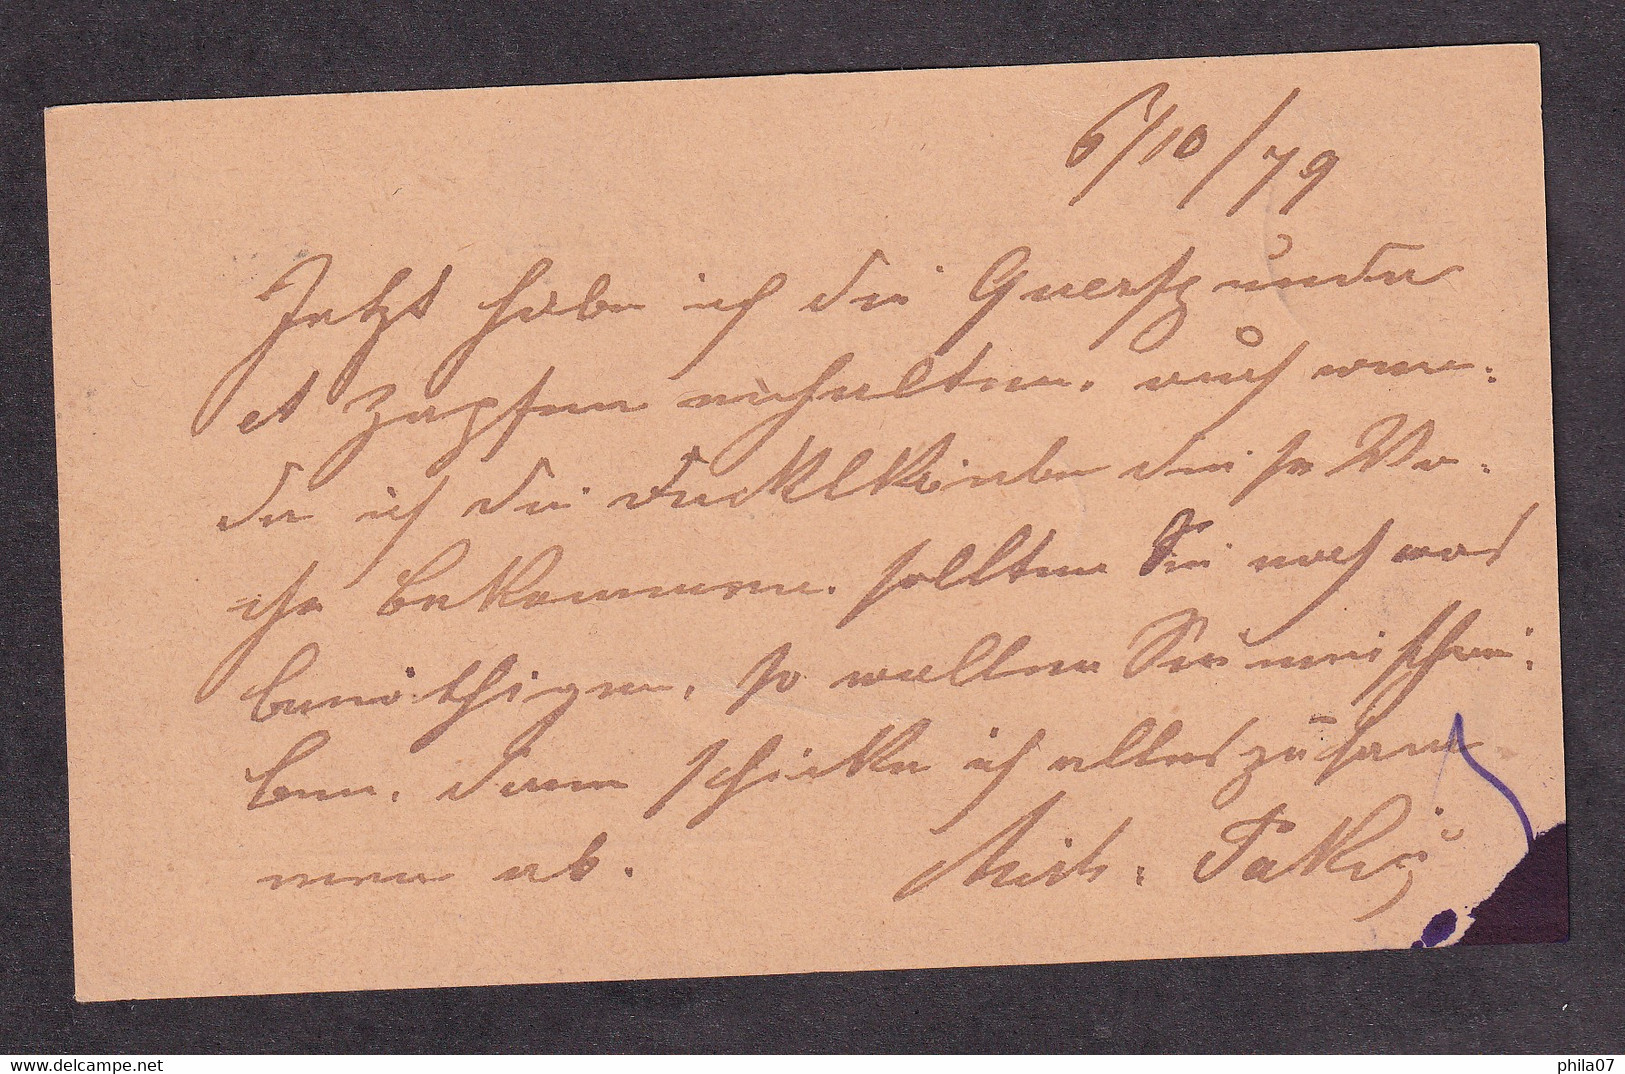 AUSTRIA - Bilingual Stationery, German/Slovenian Language, Mi.No. P-30. Sent From Laibach To Agram 1879. - 2 Scans - Covers & Documents